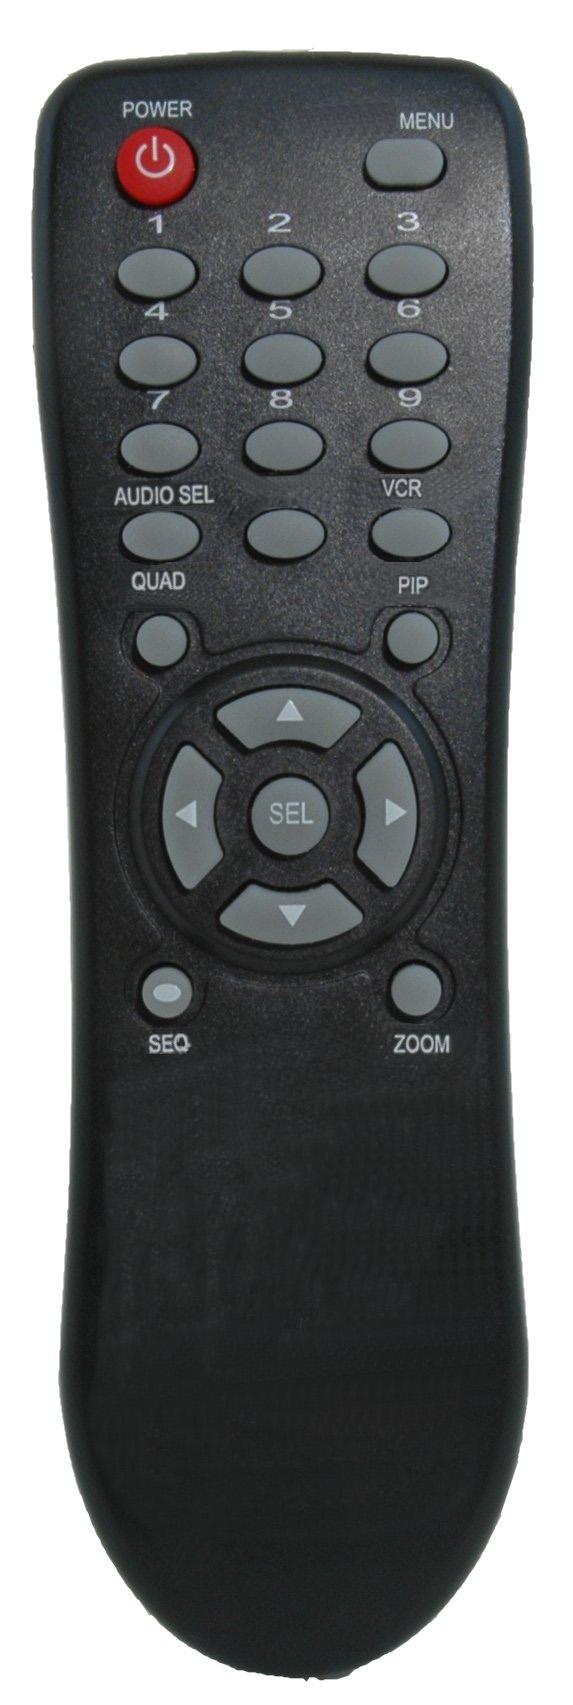 SG17F6584 - Remote Control SG17F6584 - Remote Control POWER - Turns the Power Save mode ON/OFF 1-8 - Switch between Cameras 1-8 MENU - Enter the Menu setup mode AUDIO SEL - Select the active audio